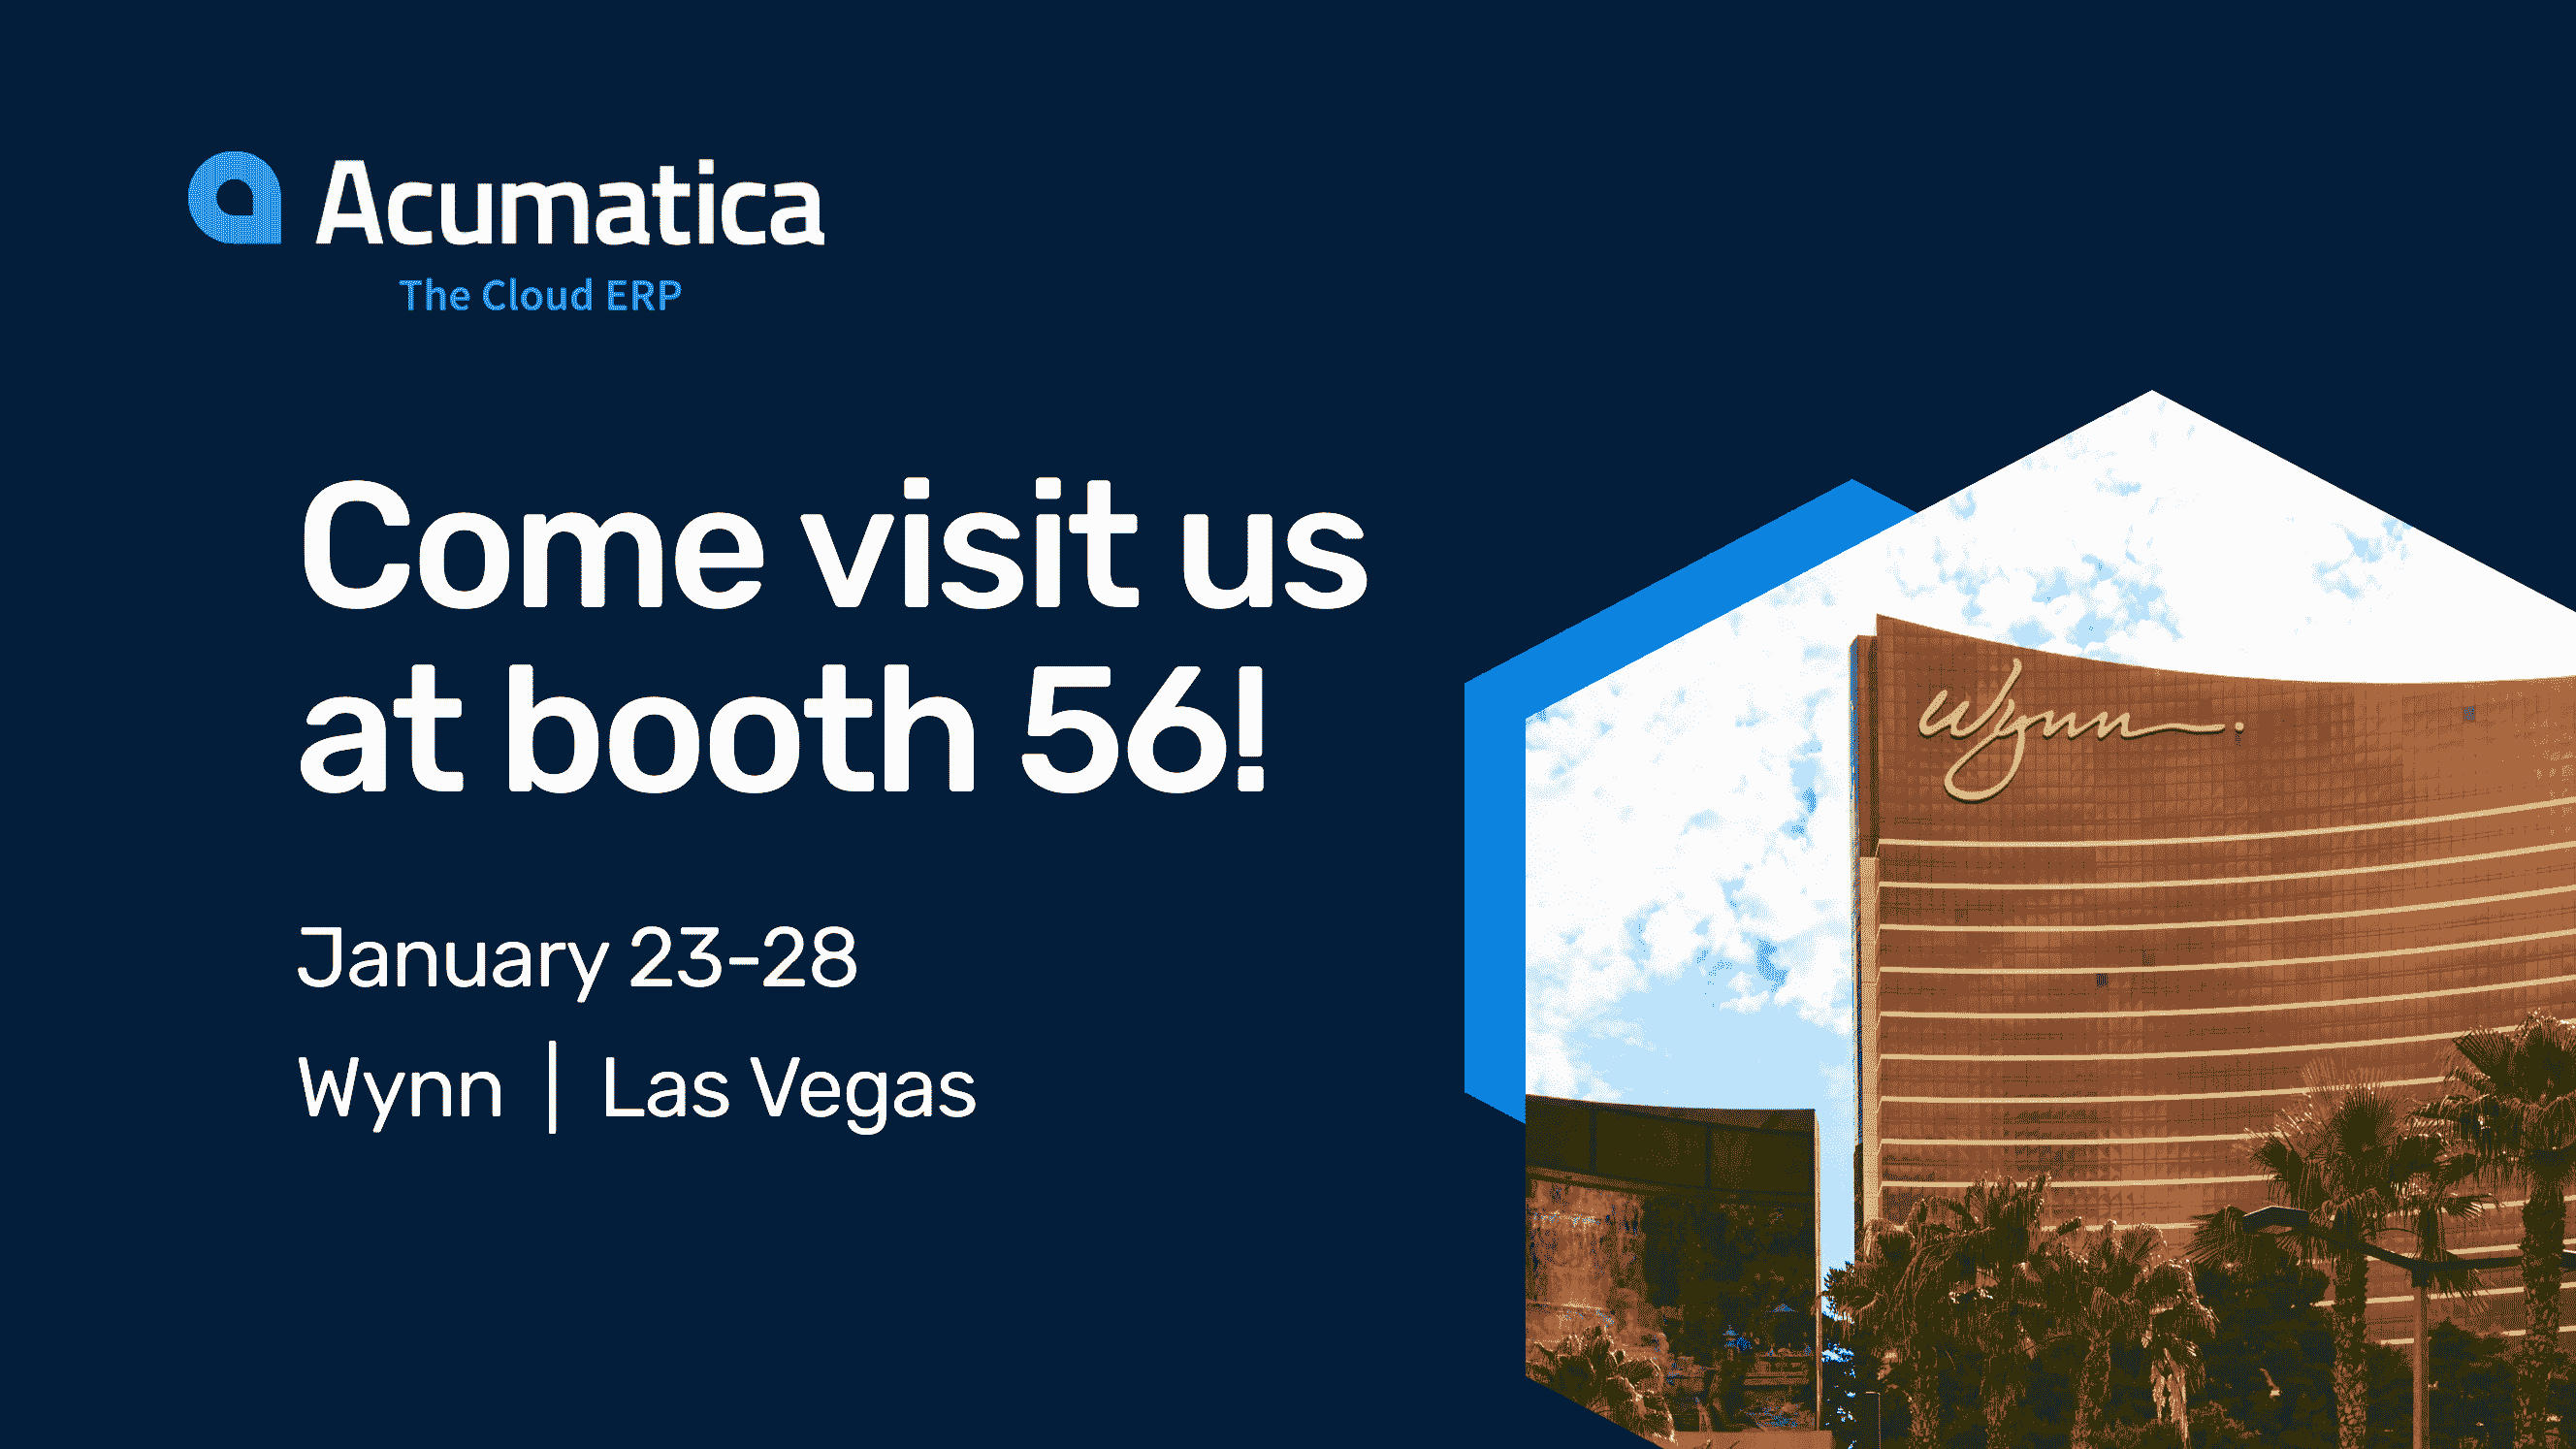 Invitation to visit booth 56 at Acumatica conference at the Wynn in Last Vegas between January 23rd to the 28th